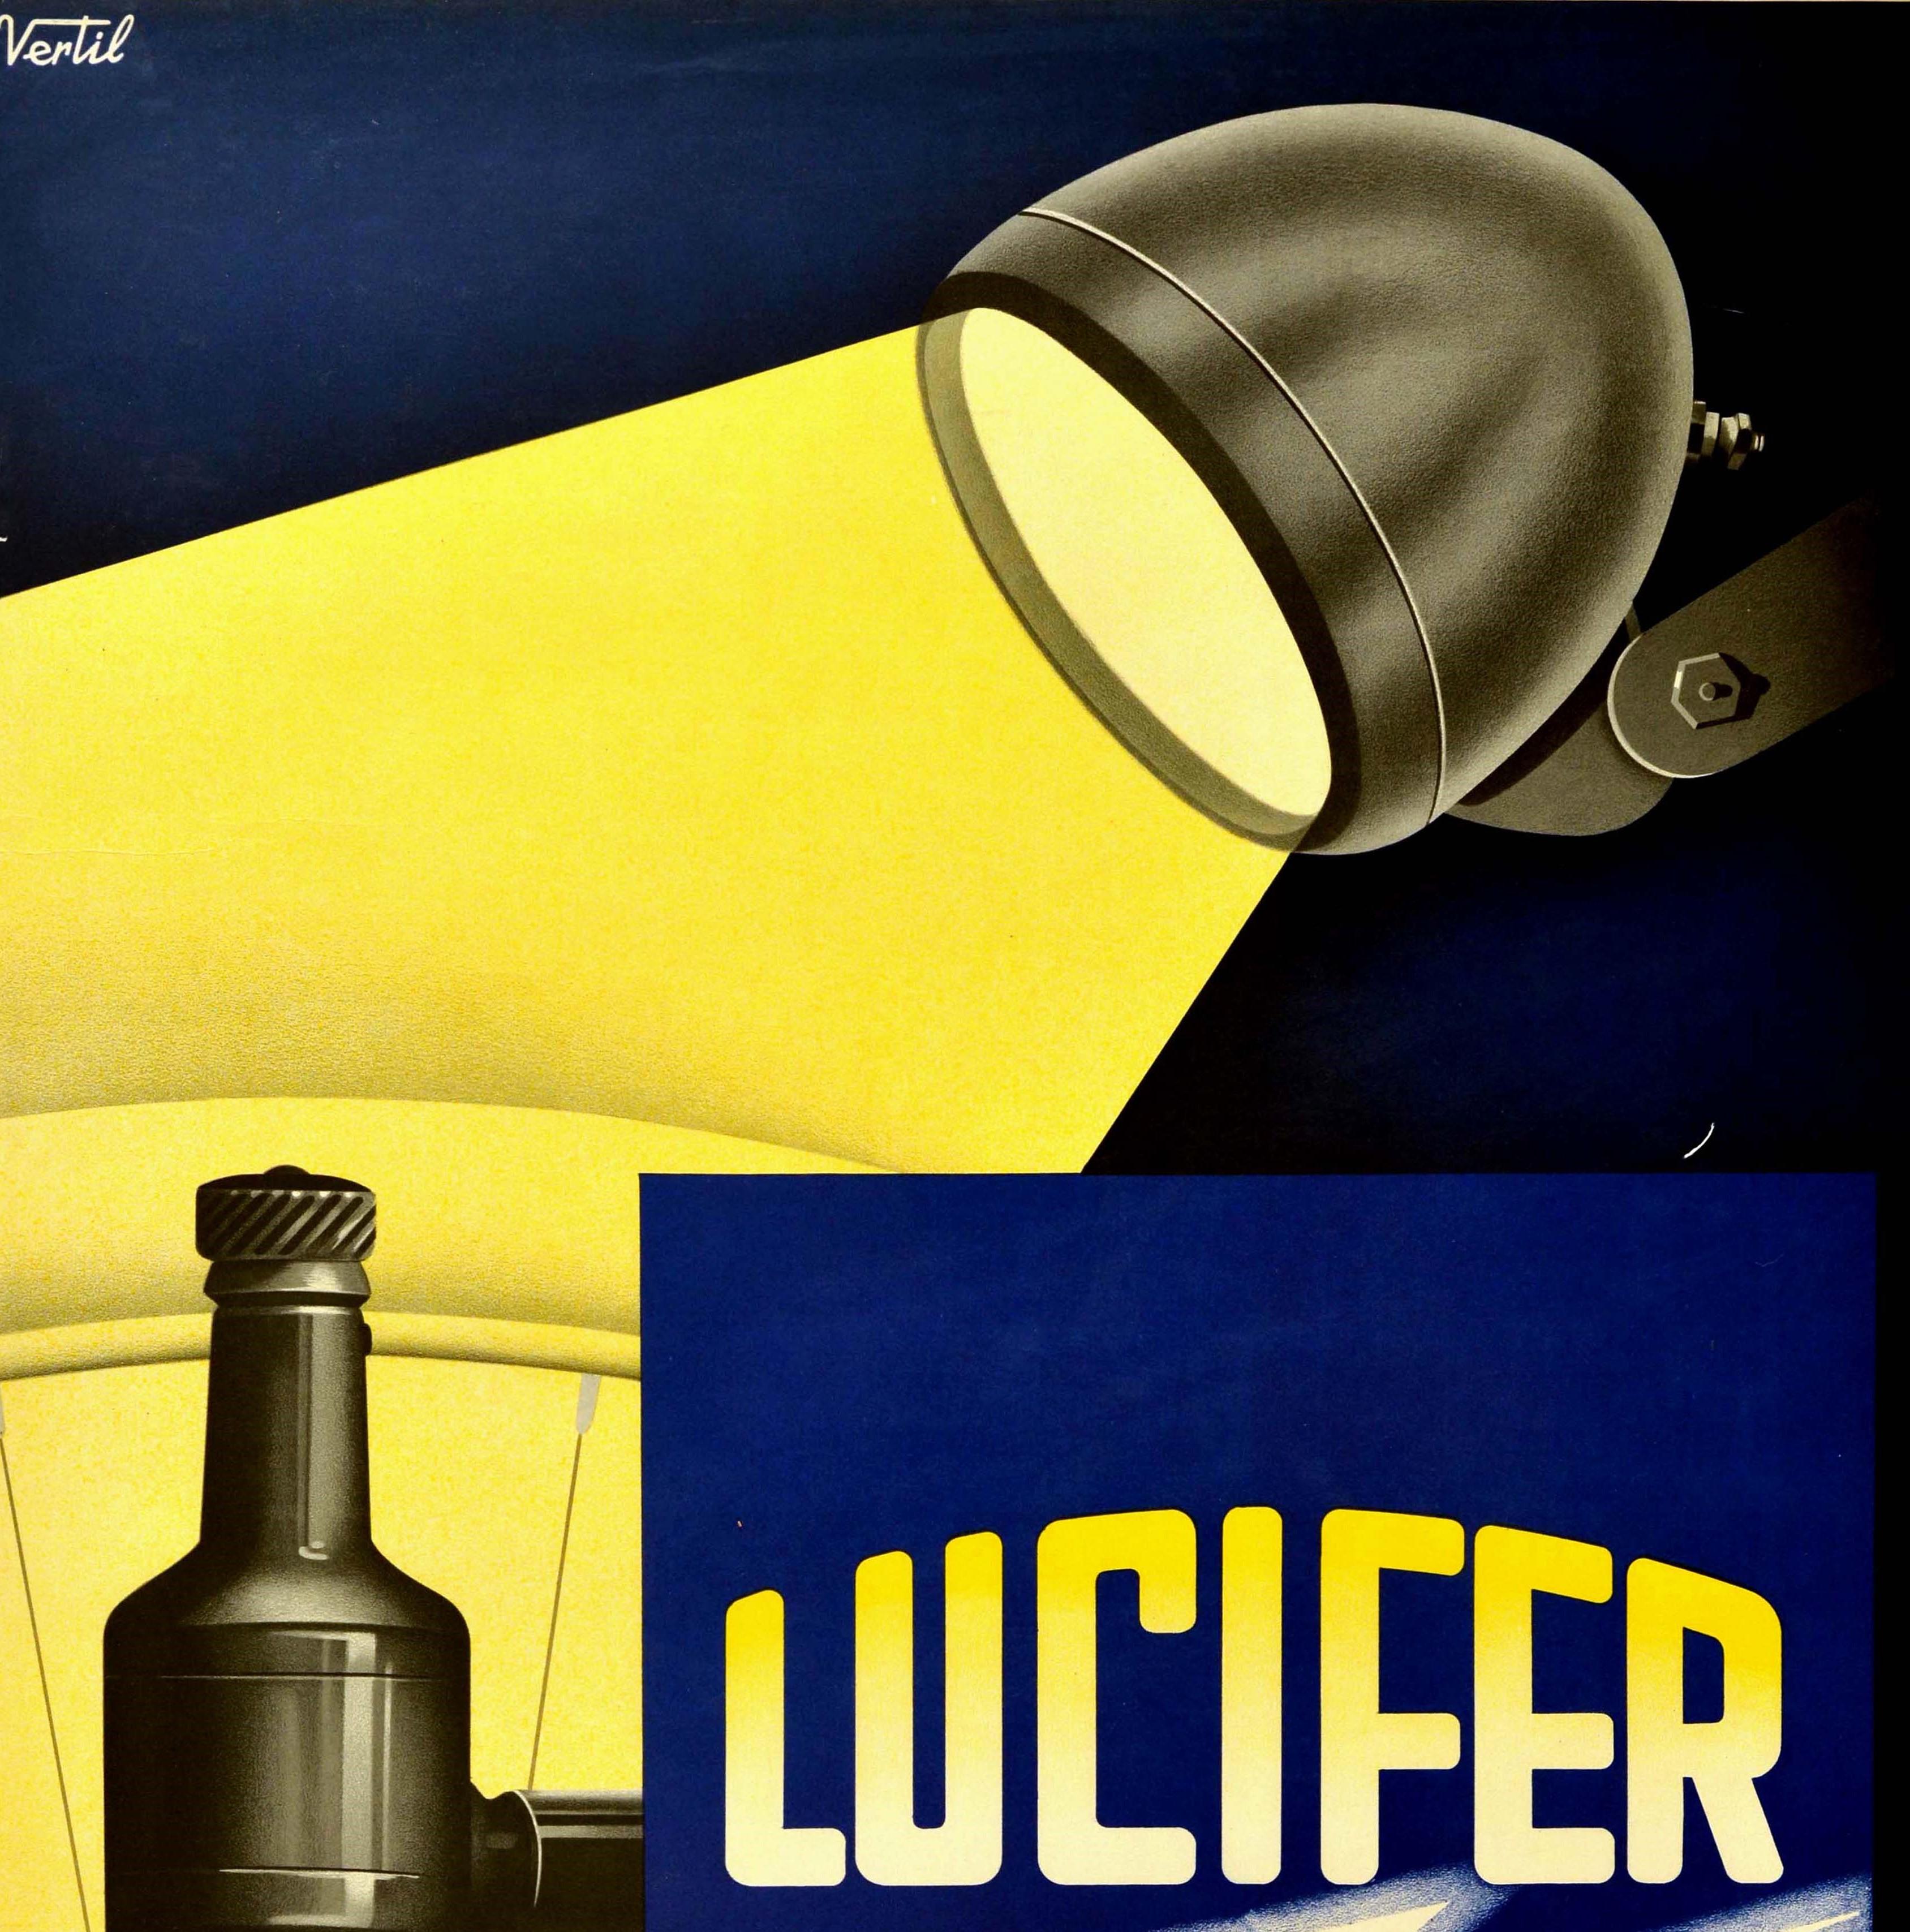 Original vintage advertising poster for Lucifer Bike Lights - Since 1910 Always in the Lead S.A. Lucifer Geneva Switzerland the Inventors of Electric Lighting for Bikes / Depuis 1910 Toujours en Tete S.A. Lucifer Geneve Suisse les Inventeurs de